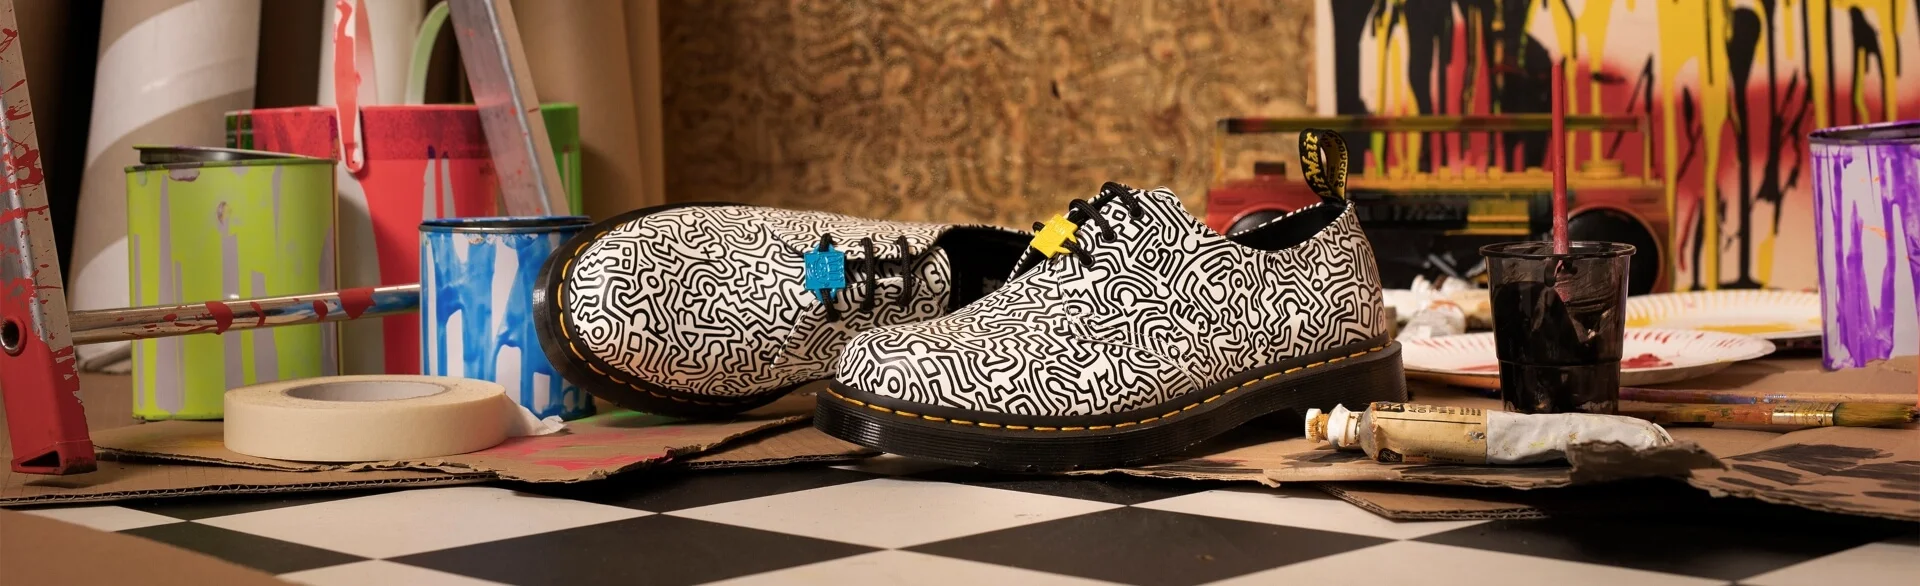 Dr Martens X Keith Haring